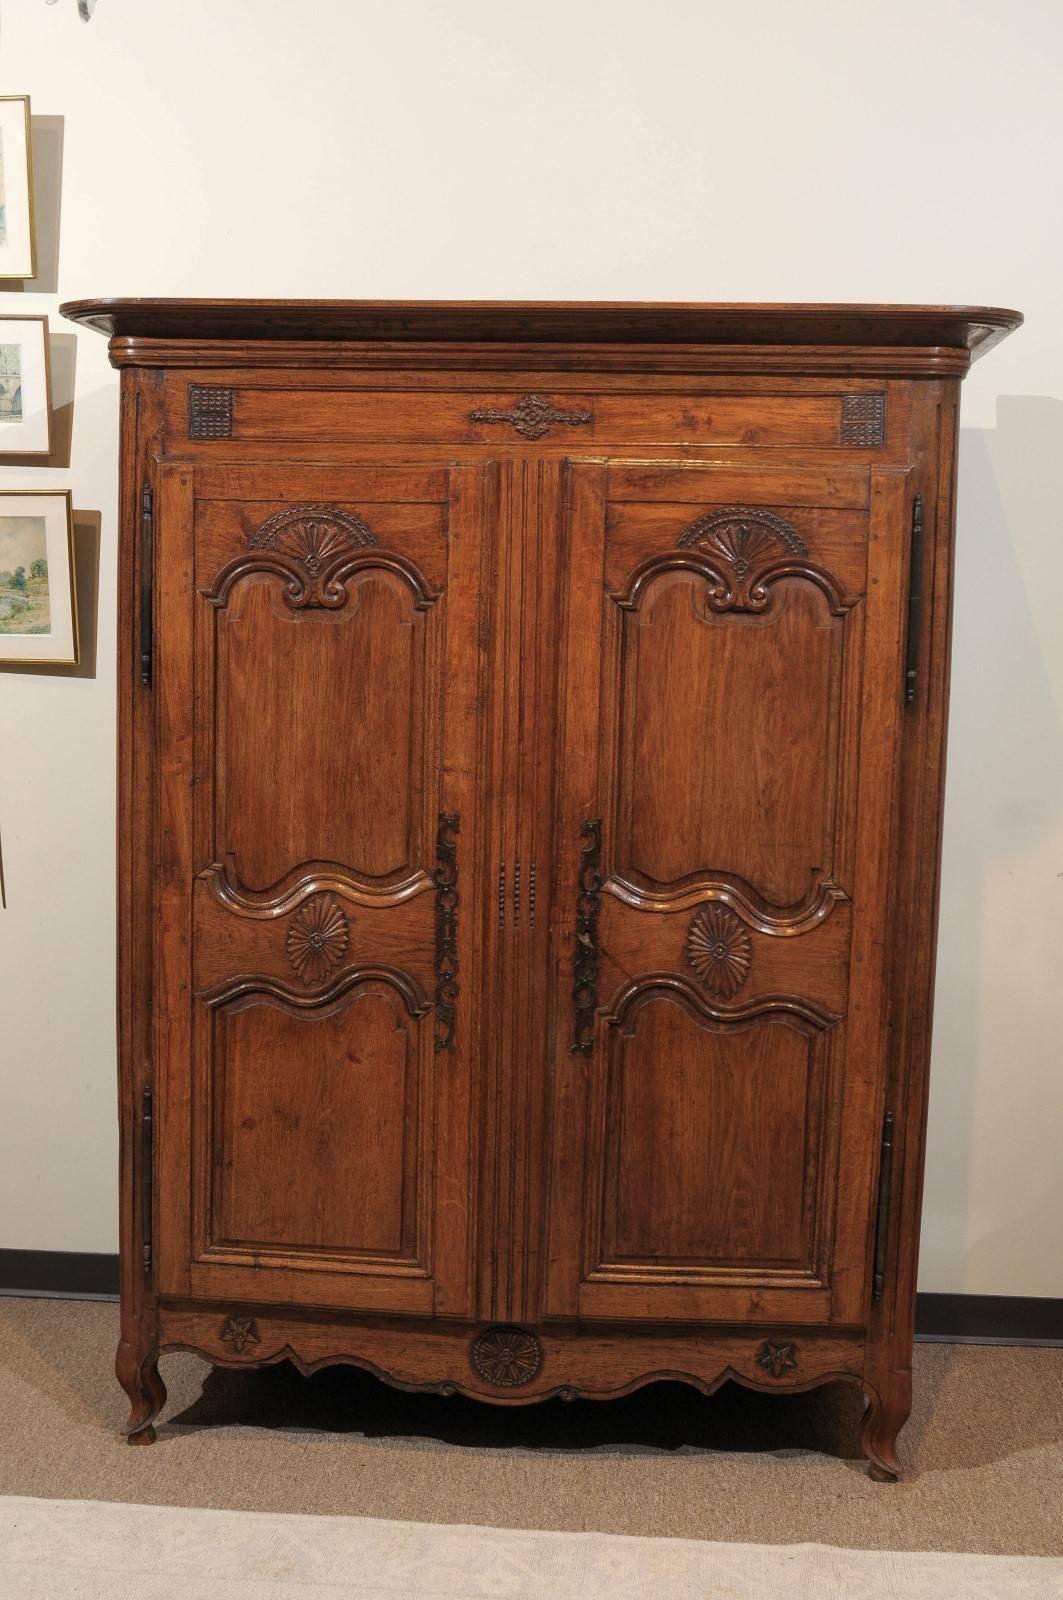 Small 19th Century Medium Brown Oak Armoire, circa 1860
This little armoire from Normandy has some really nice carving and a great patina. It is short enough to go in a room with eight or nine foot ceilings but large enough to provide a good deal of